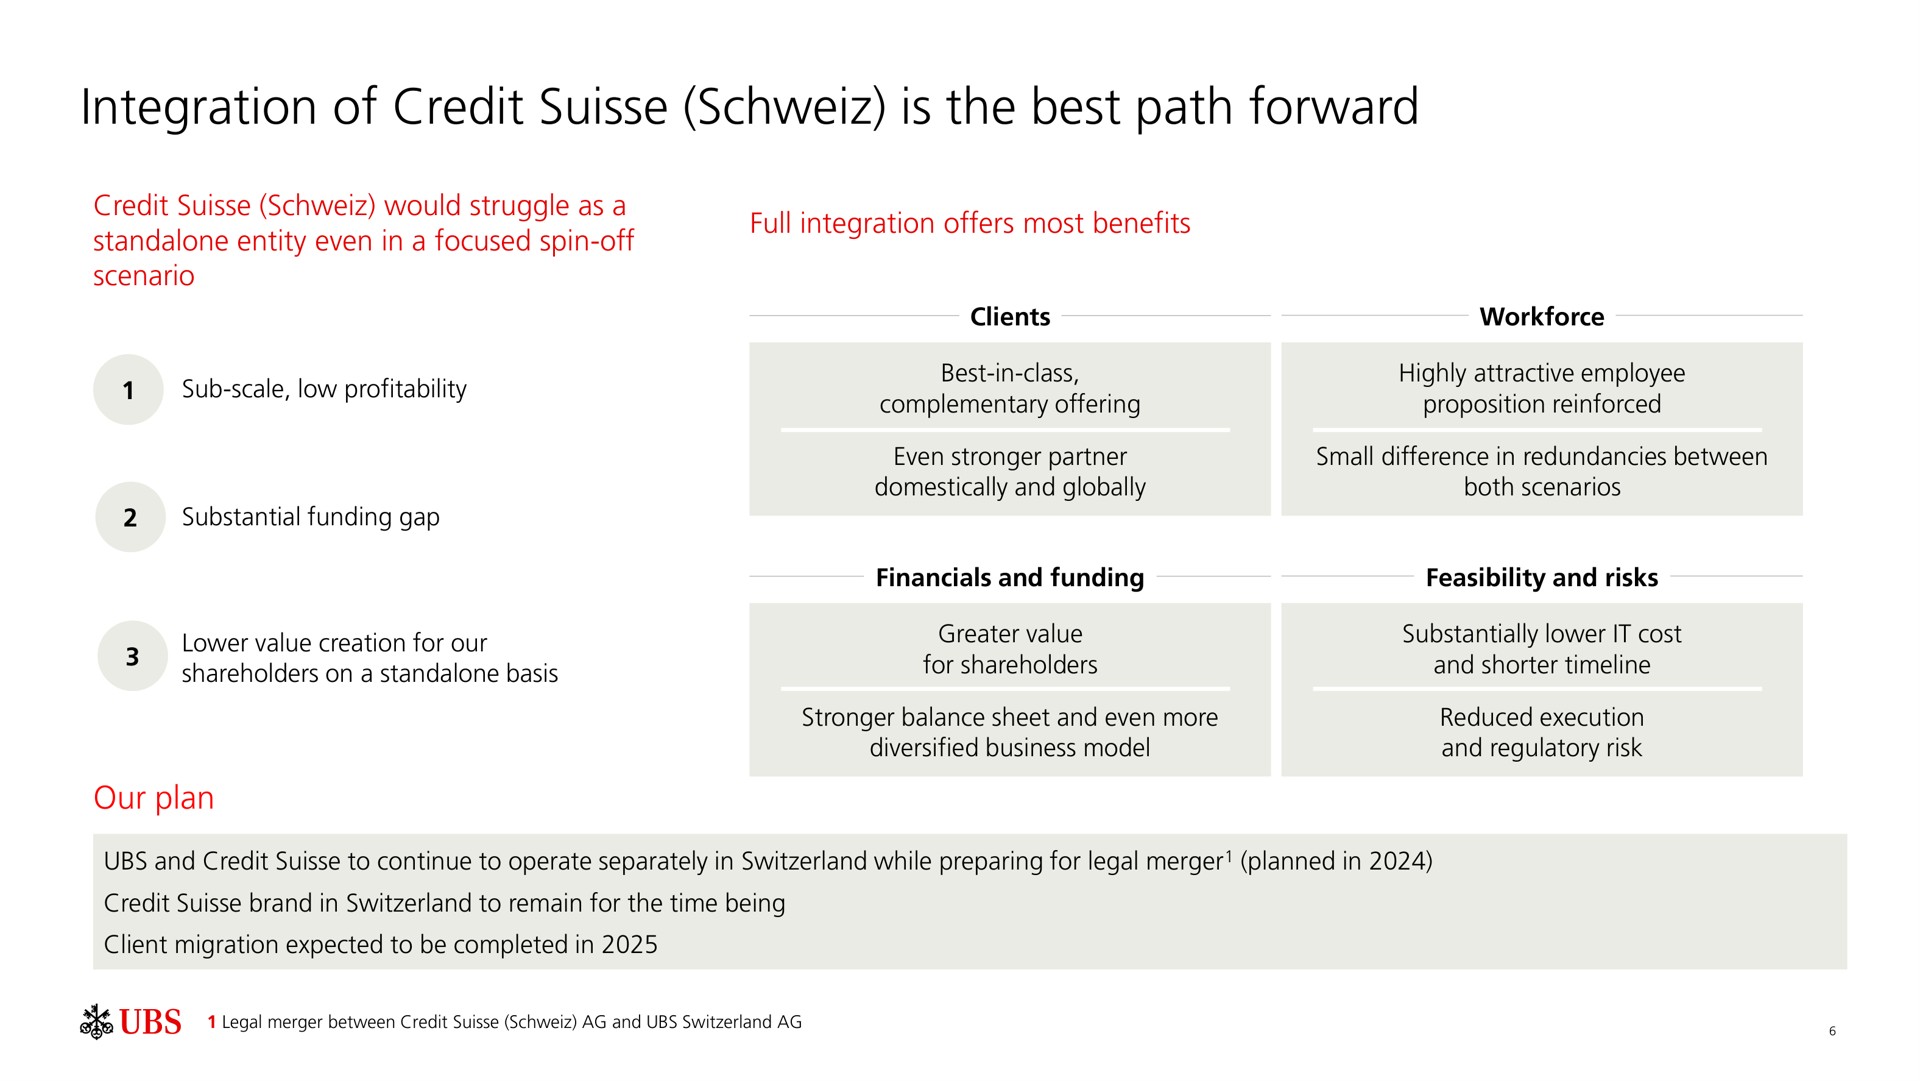 integration of credit is the best path forward | UBS